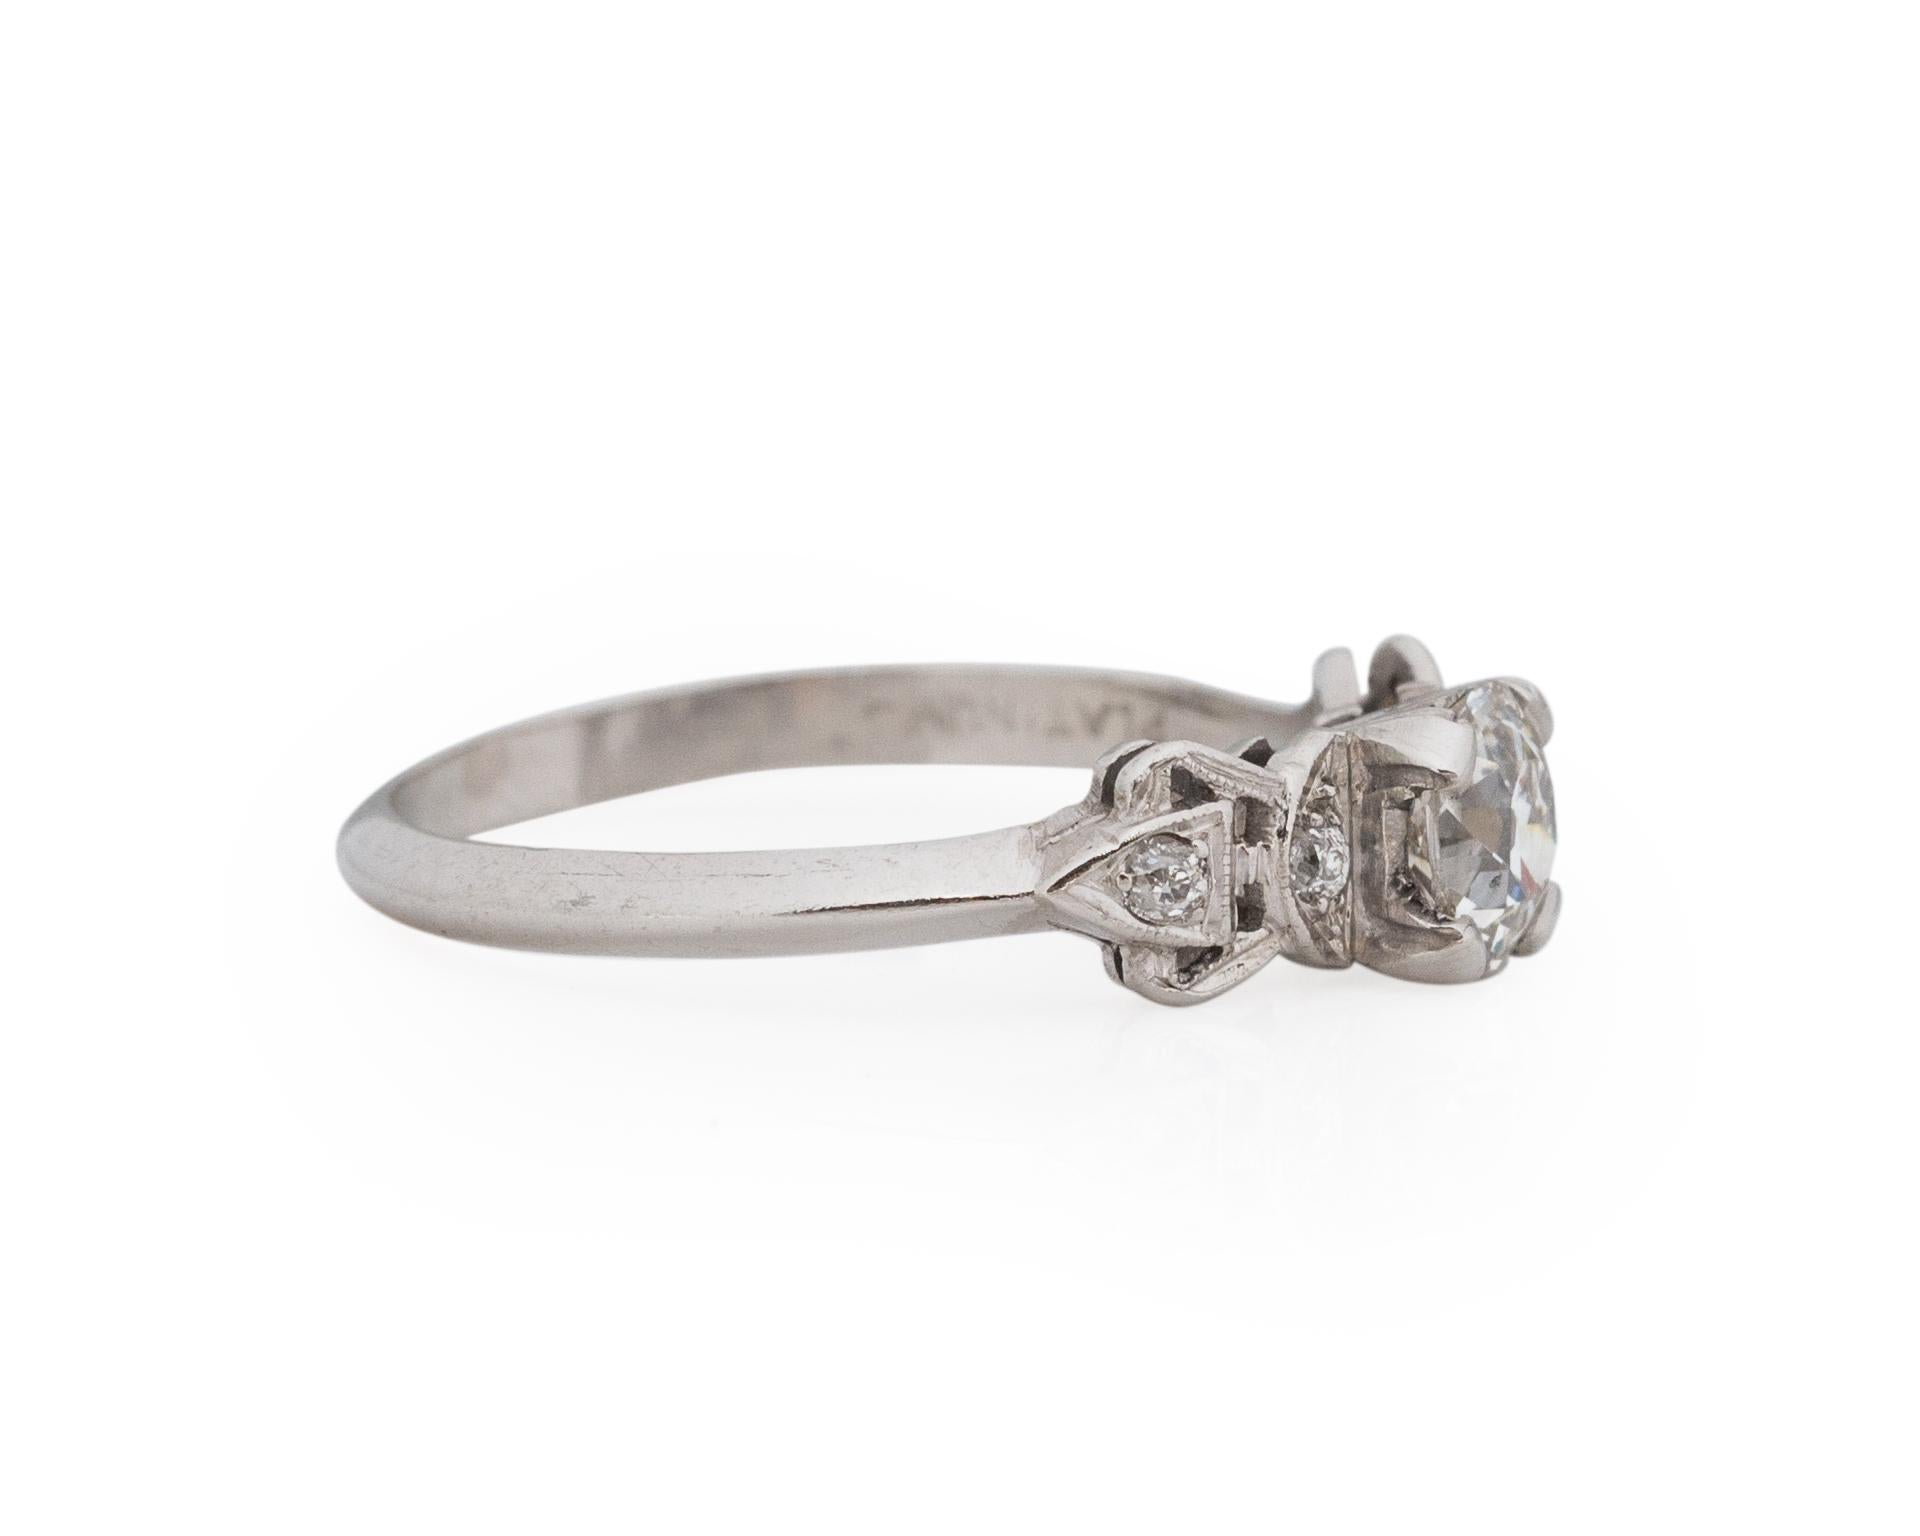 Ring Size: 6.75
Metal Type: Platinum [Hallmarked, and Tested]
Weight: 3.4 grams

Center Diamond Details:
GIA REPORT #: 2215892269
Weight: .58carat
Cut: Old European brilliant
Color: K
Clarity: SI1
Measurements: 5.47mm x 5.08mm x 3.17mm

Side Stone